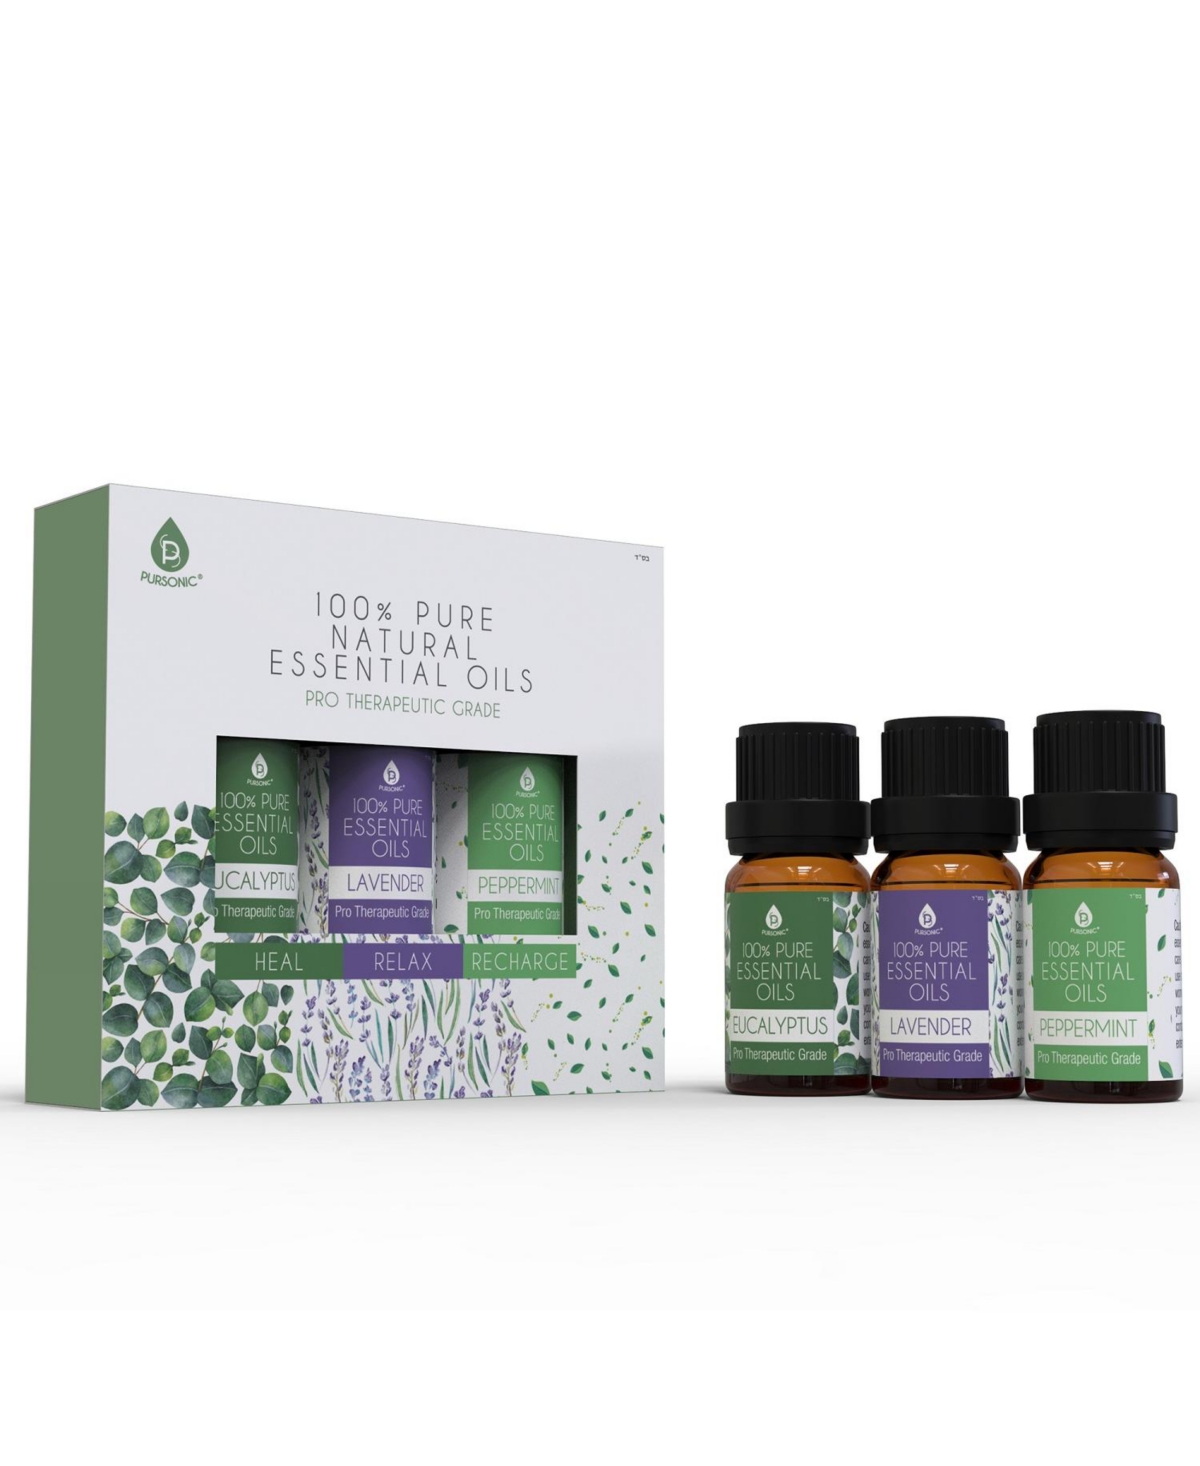 3 pack of 100% Pure Essential Oils (Eucalyptus, Lavender & Peppermint) - Natural